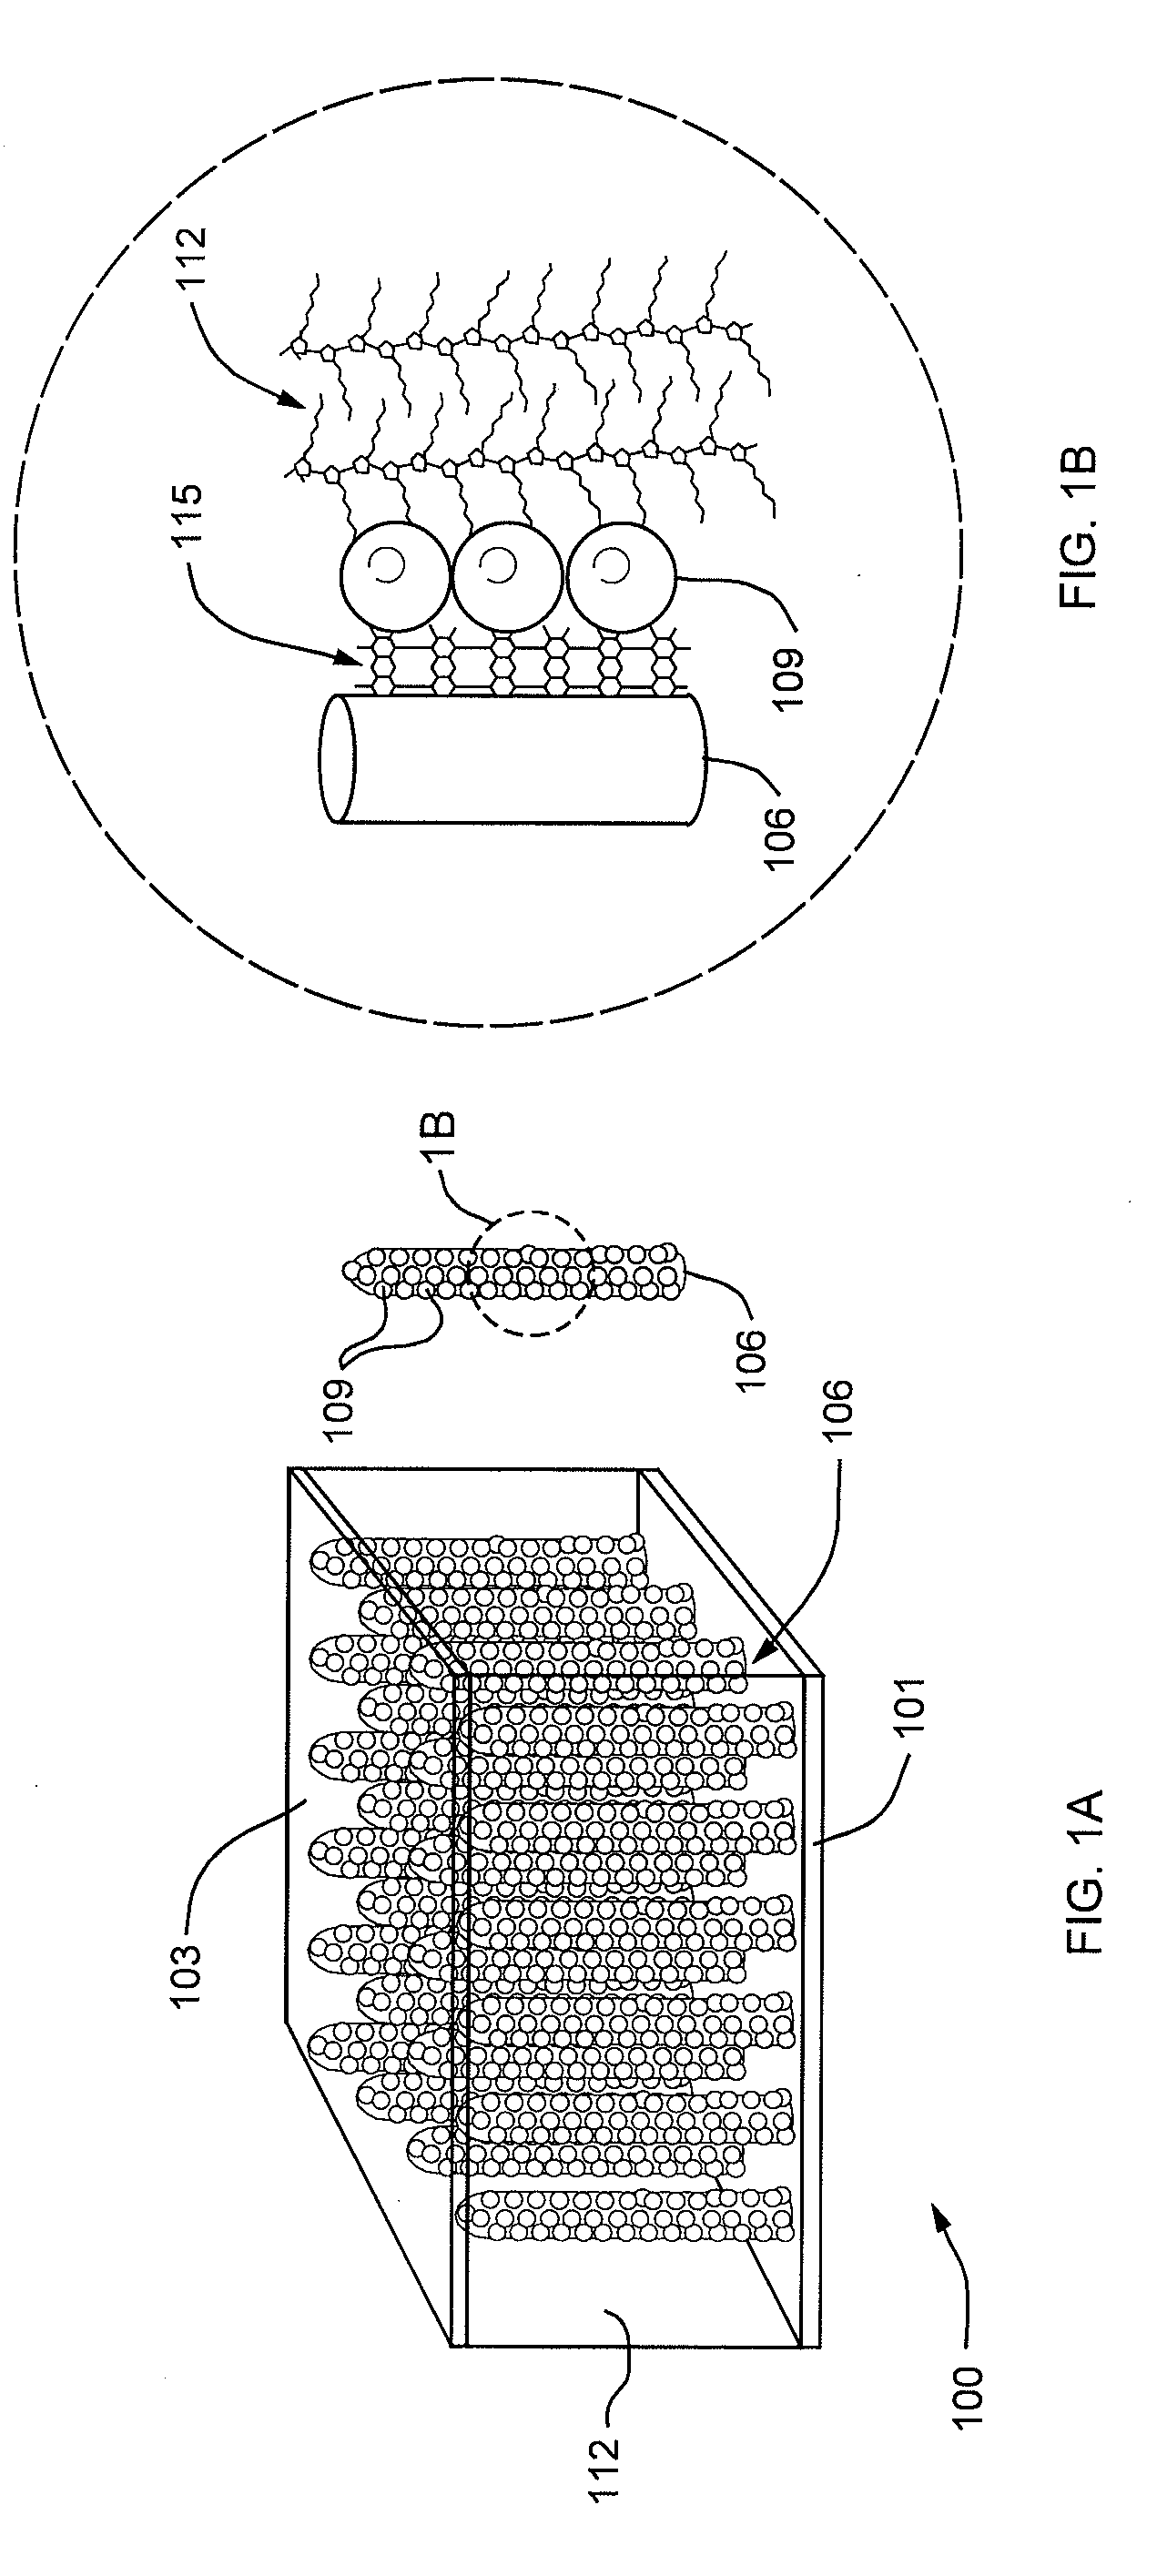 Hybrid Photovoltaic Cells and Related Methods